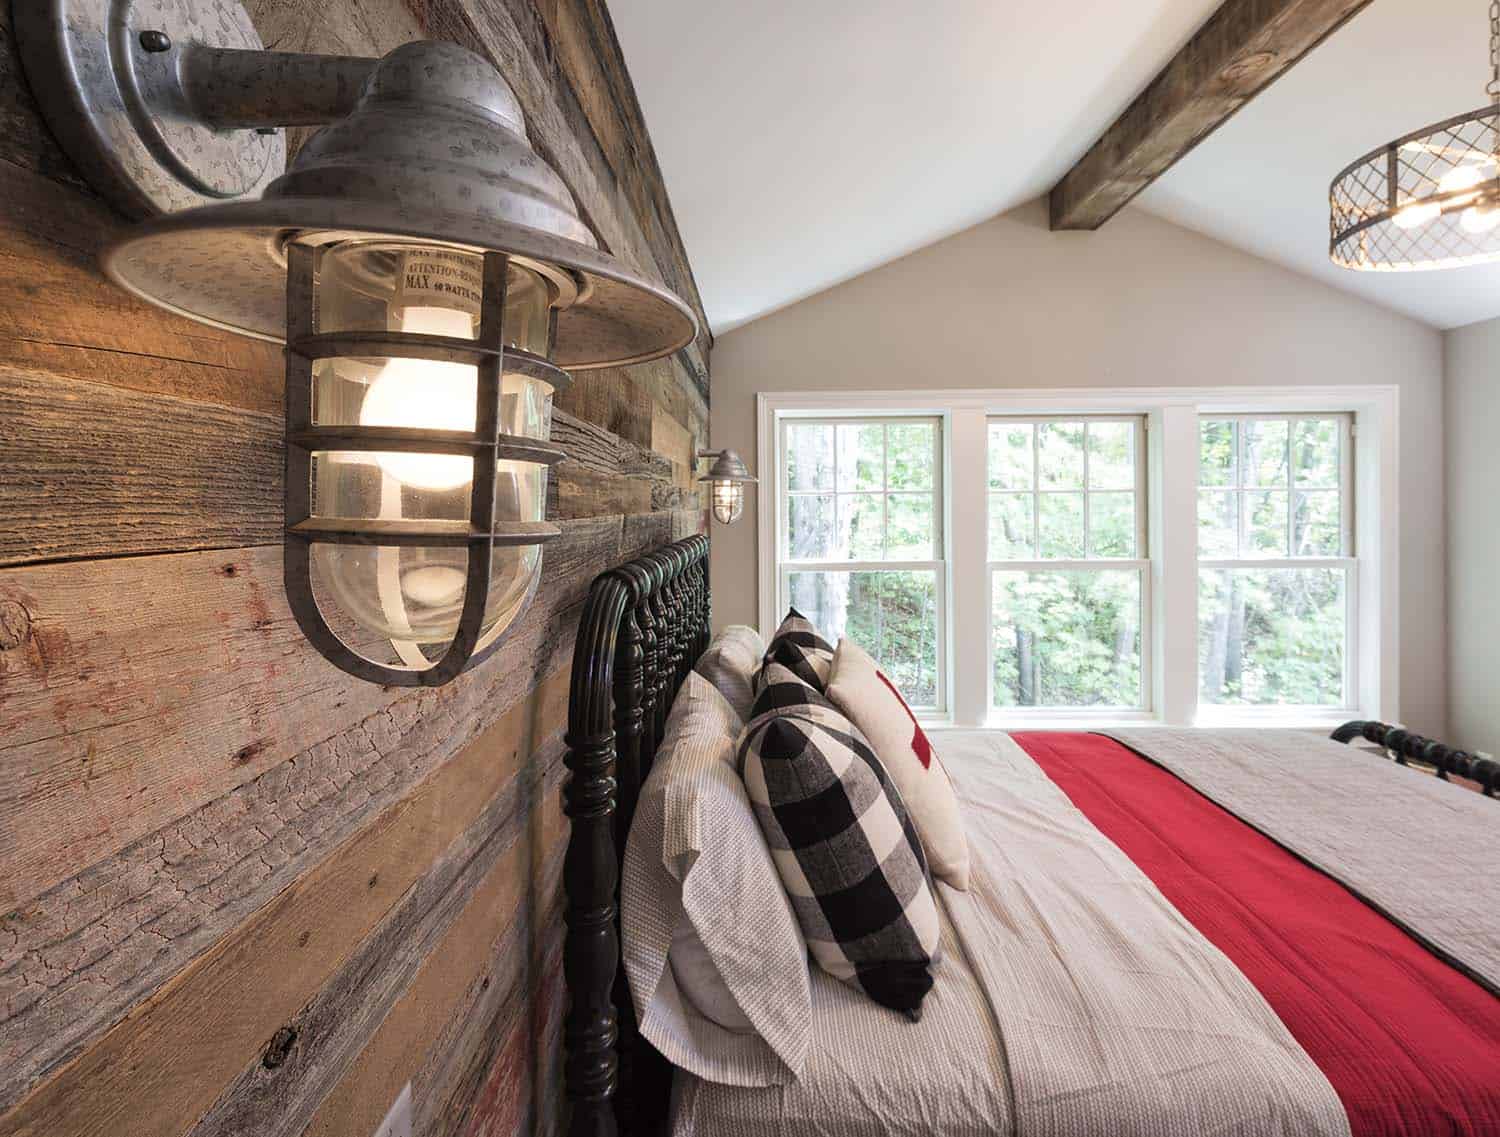 coastal farmhouse style bedroom with a wood accent wall